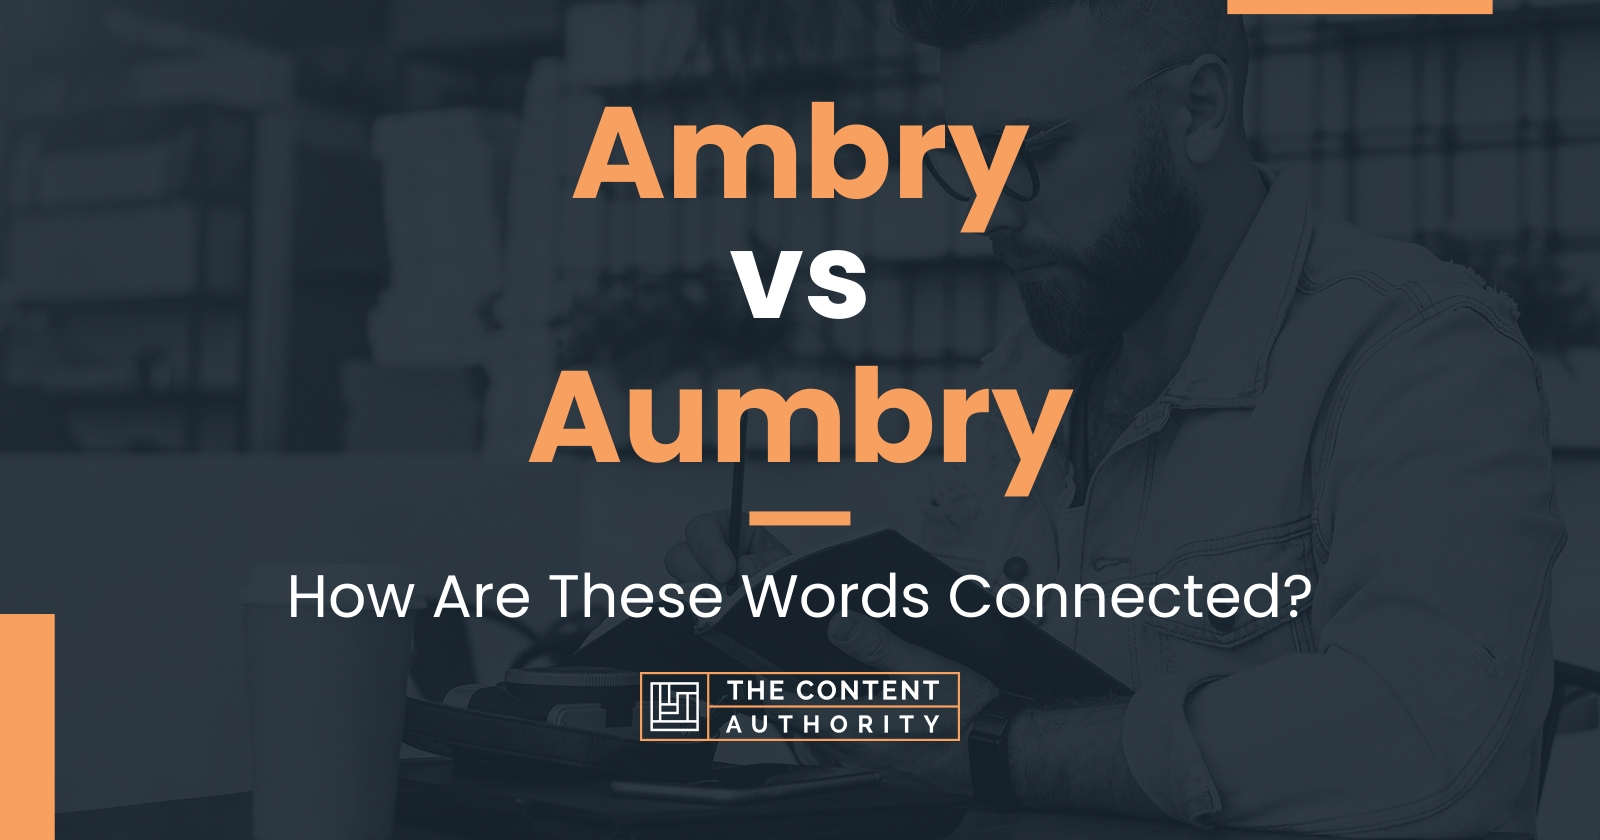 Ambry vs Aumbry: How Are These Words Connected?